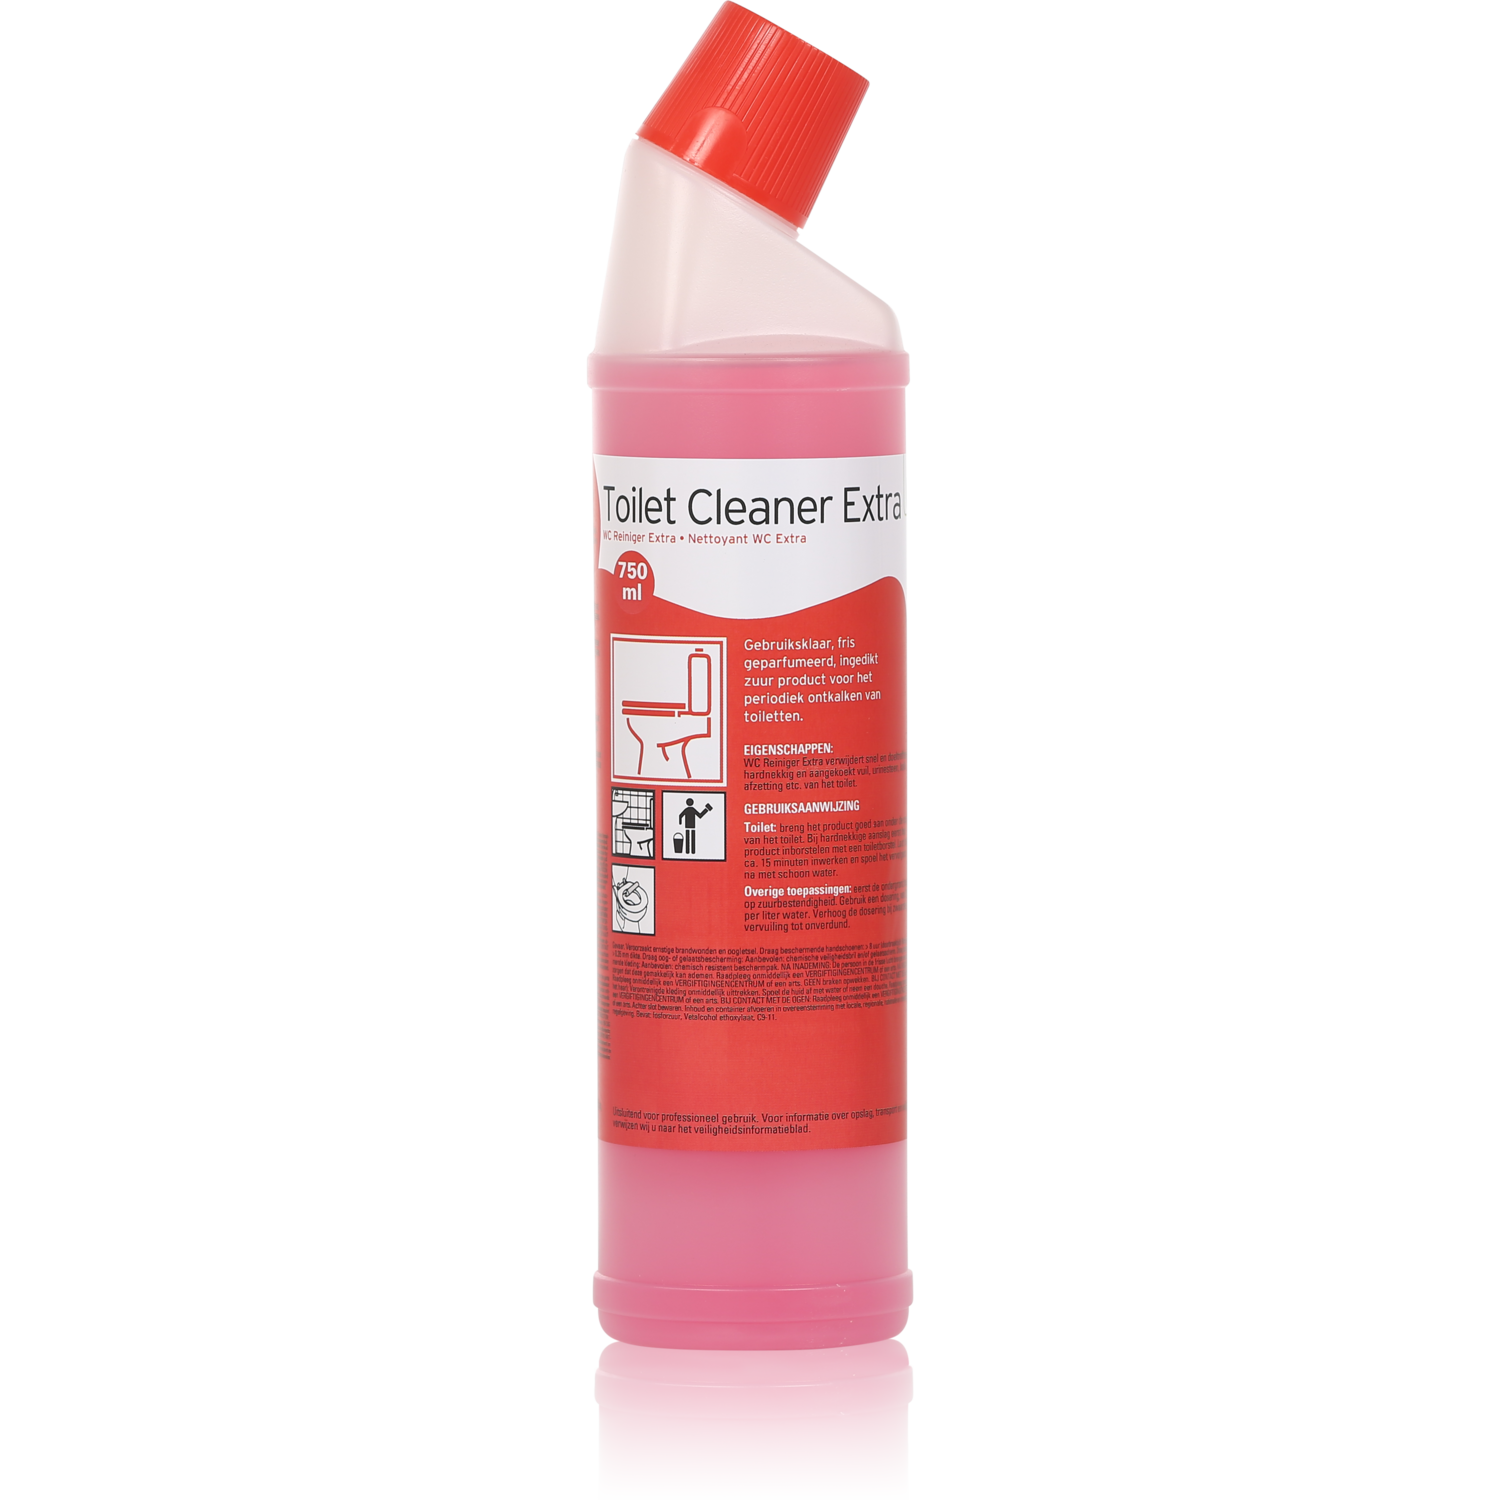 WC limescale remover, Ready to use750ml, 1 fris geparfumeerd, pink 1